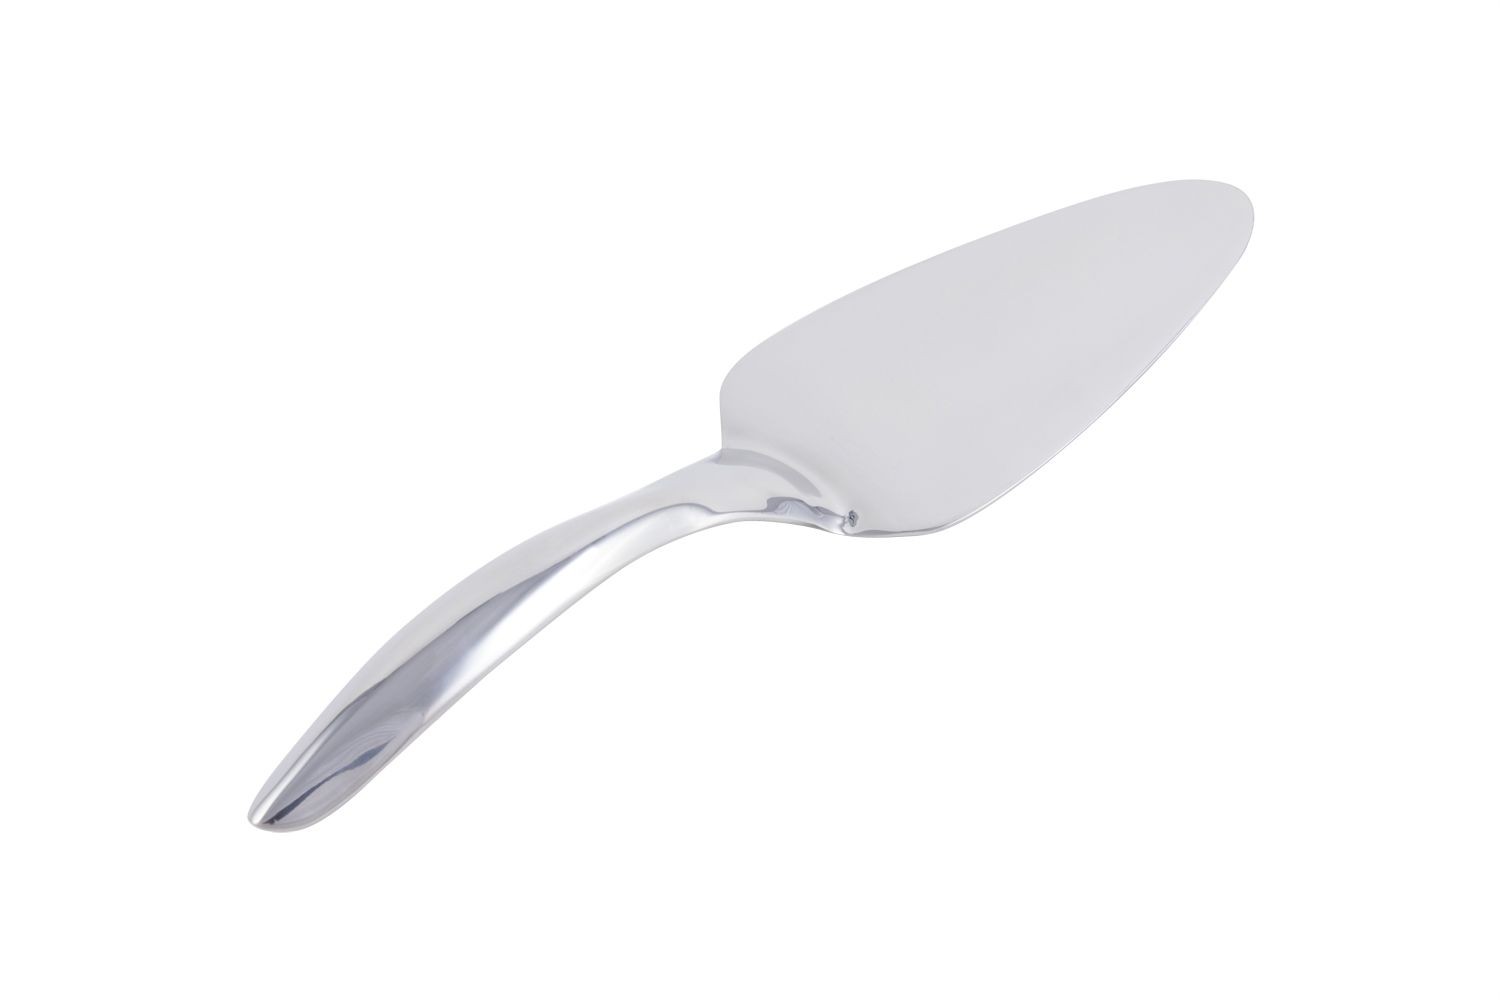 Bon Chef 9465 EZ Use Banquet Serving Pastry Server with Hollow Cool Handle, 10 1/4"